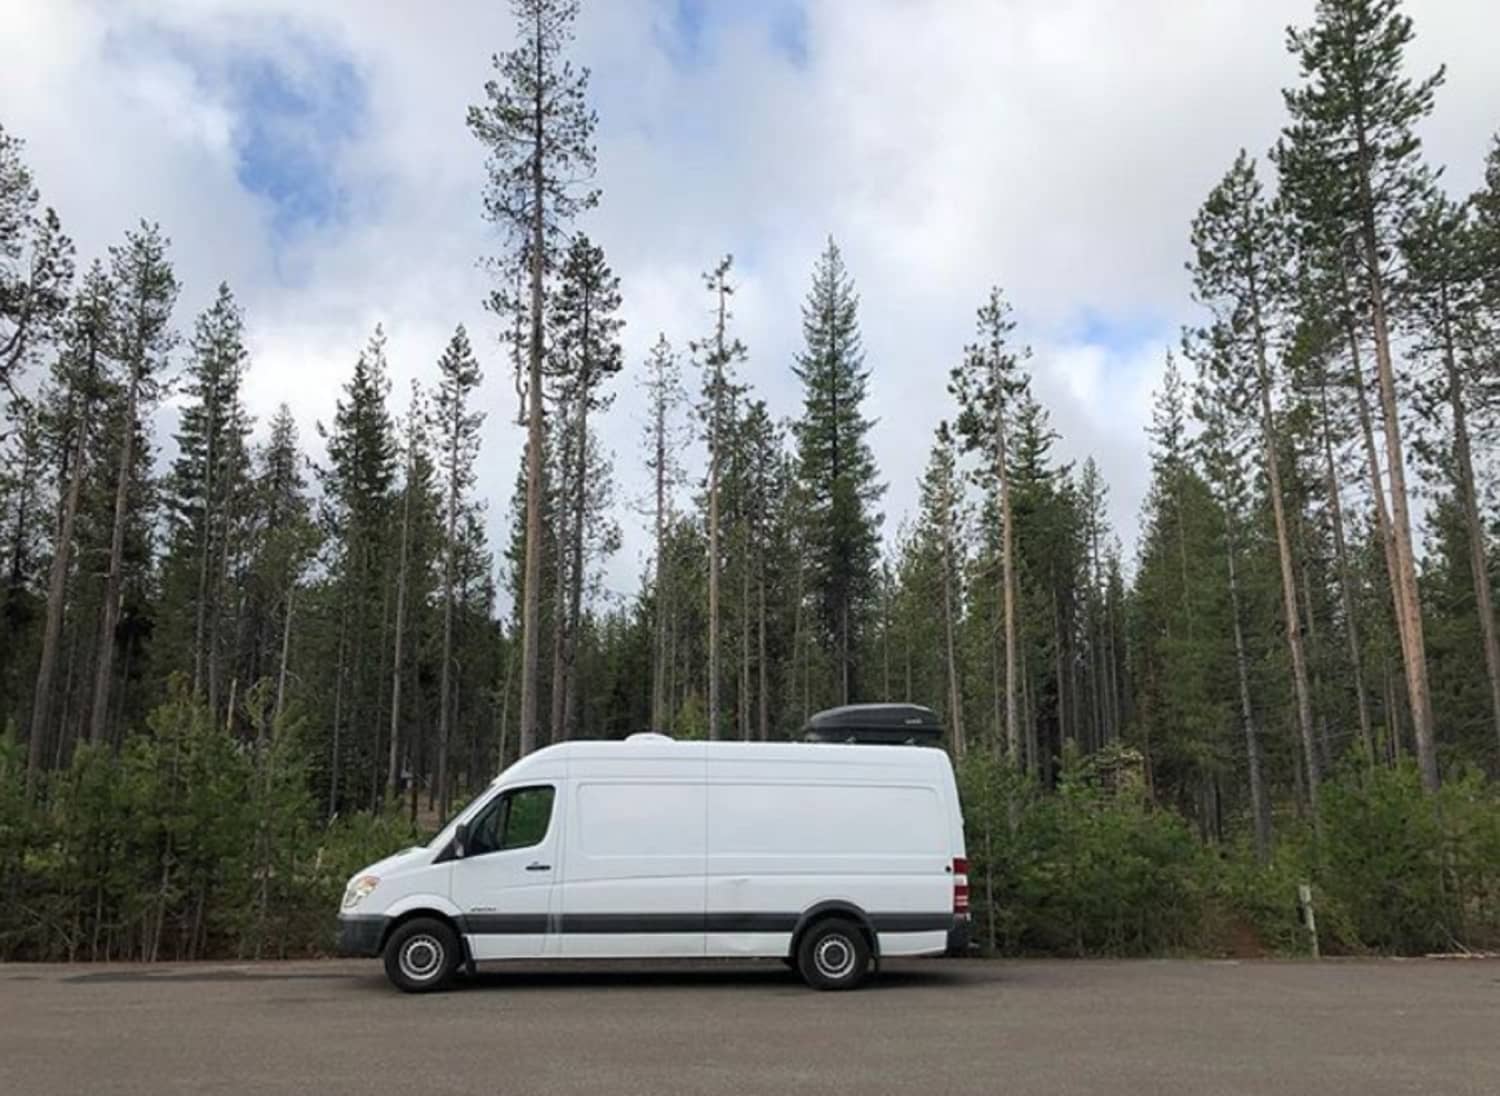 This Converted Sprinter Van is a Surprisingly Livable Tiny House on Wheels